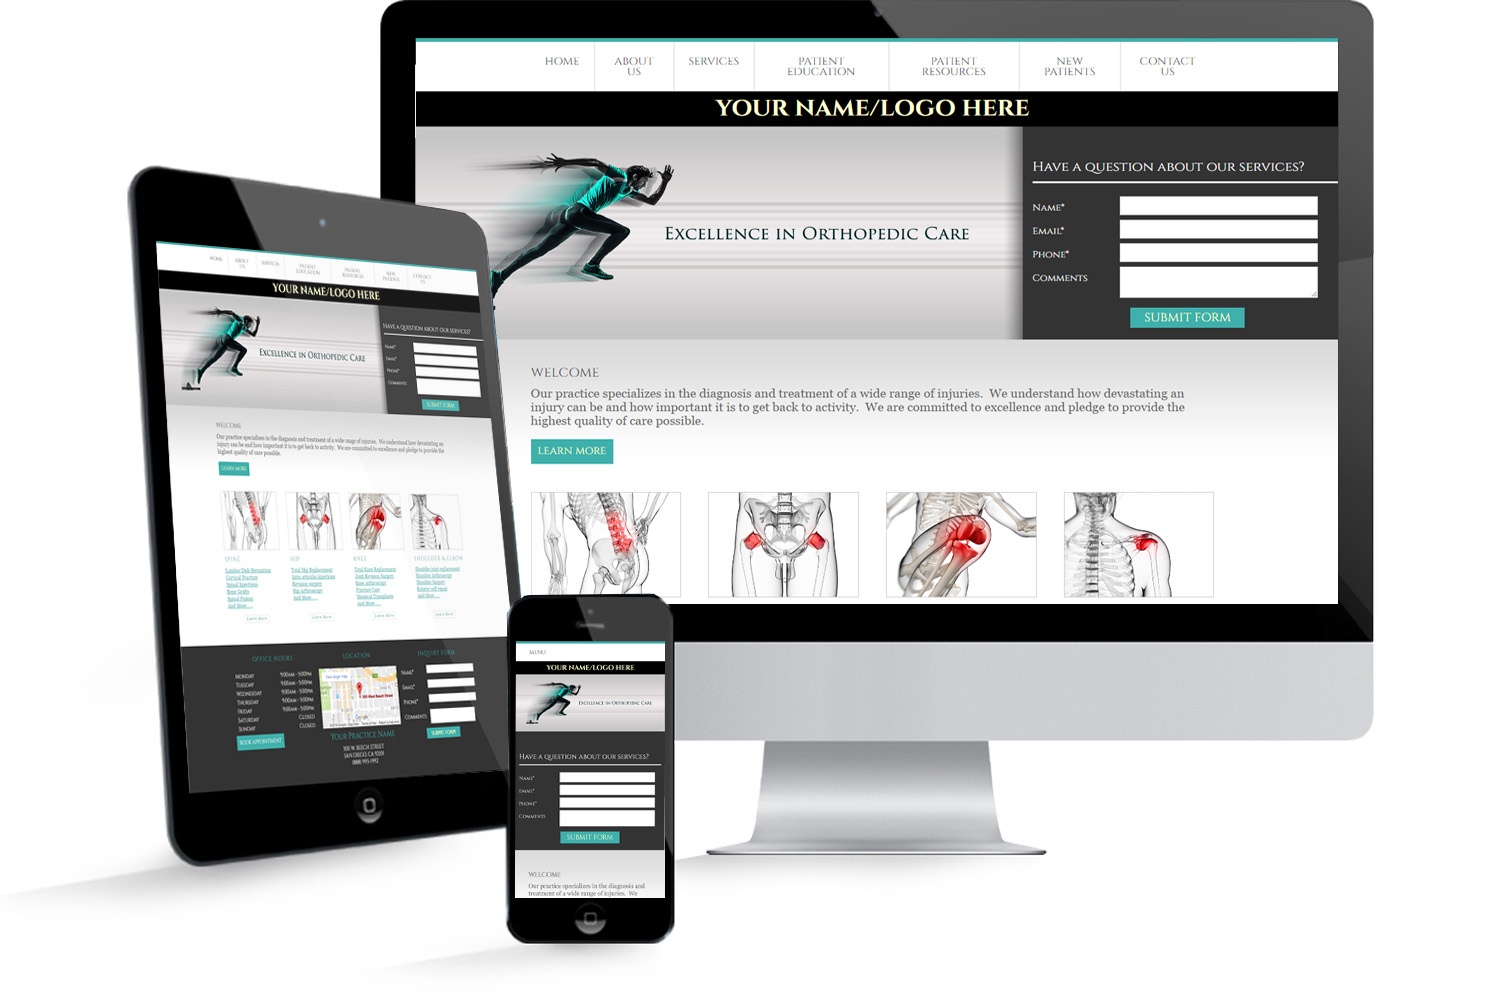 Necessity of site design for physicians